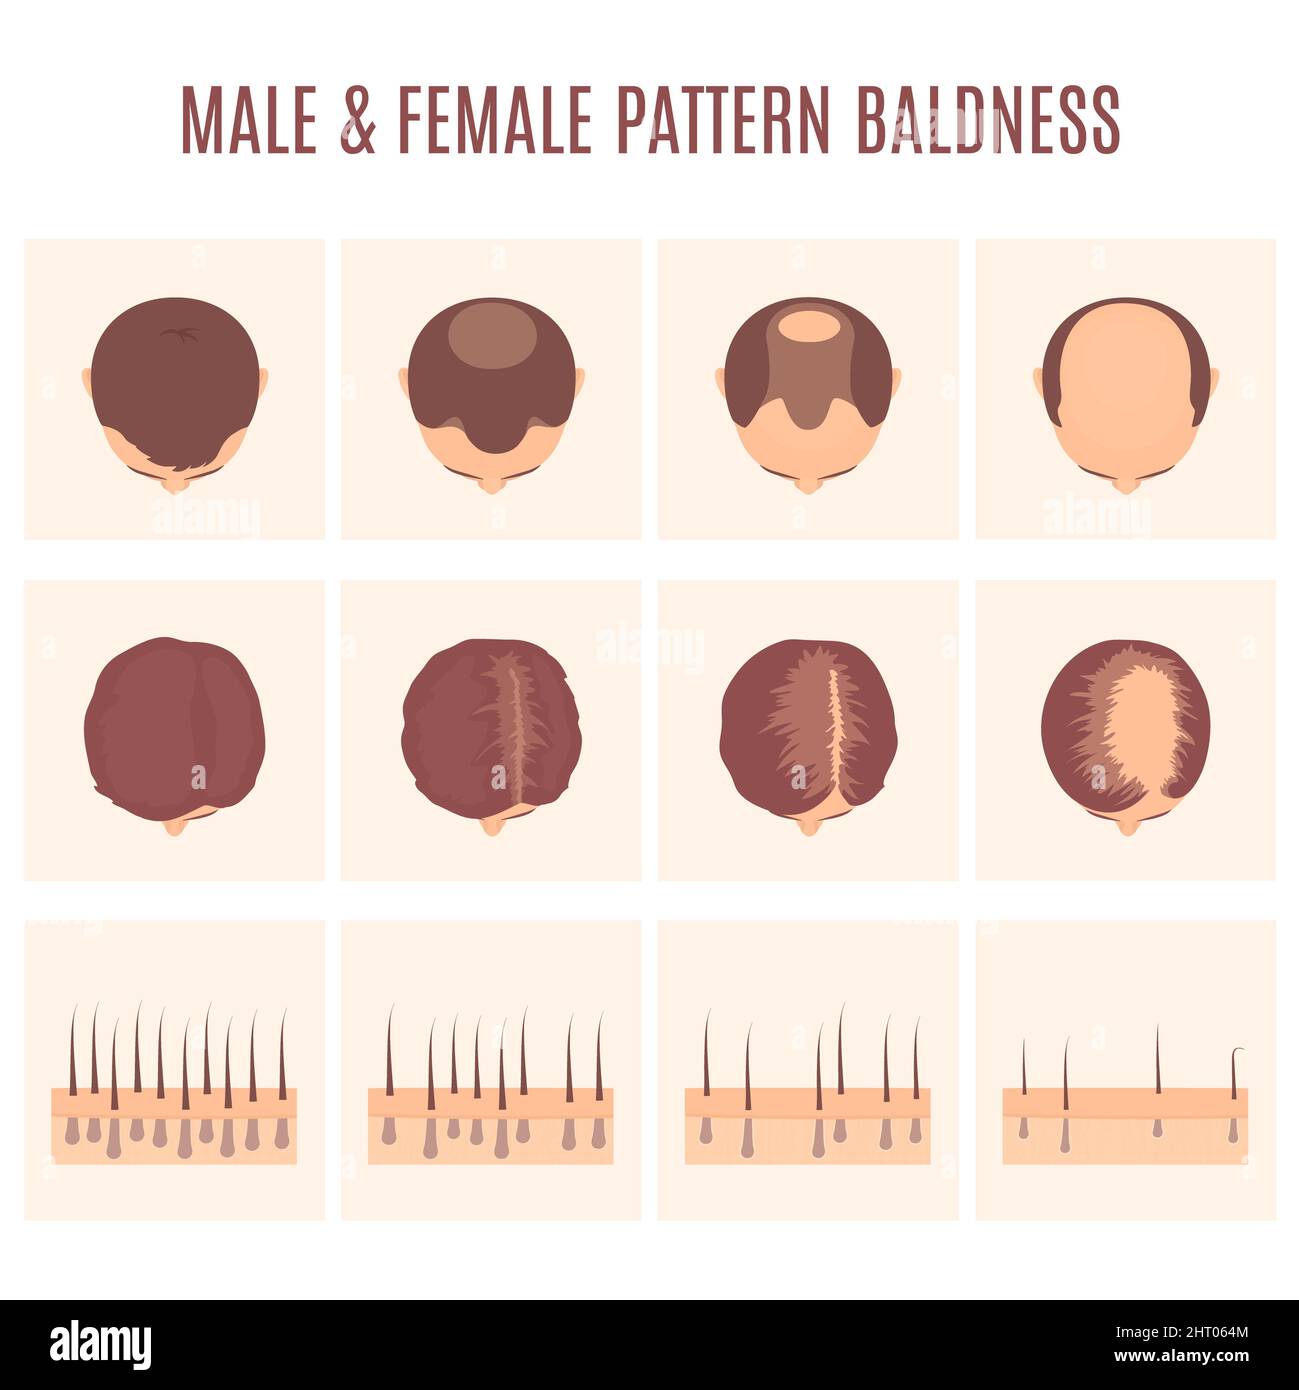 Male and female hair loss patterns, conceptual illustration Stock Photo